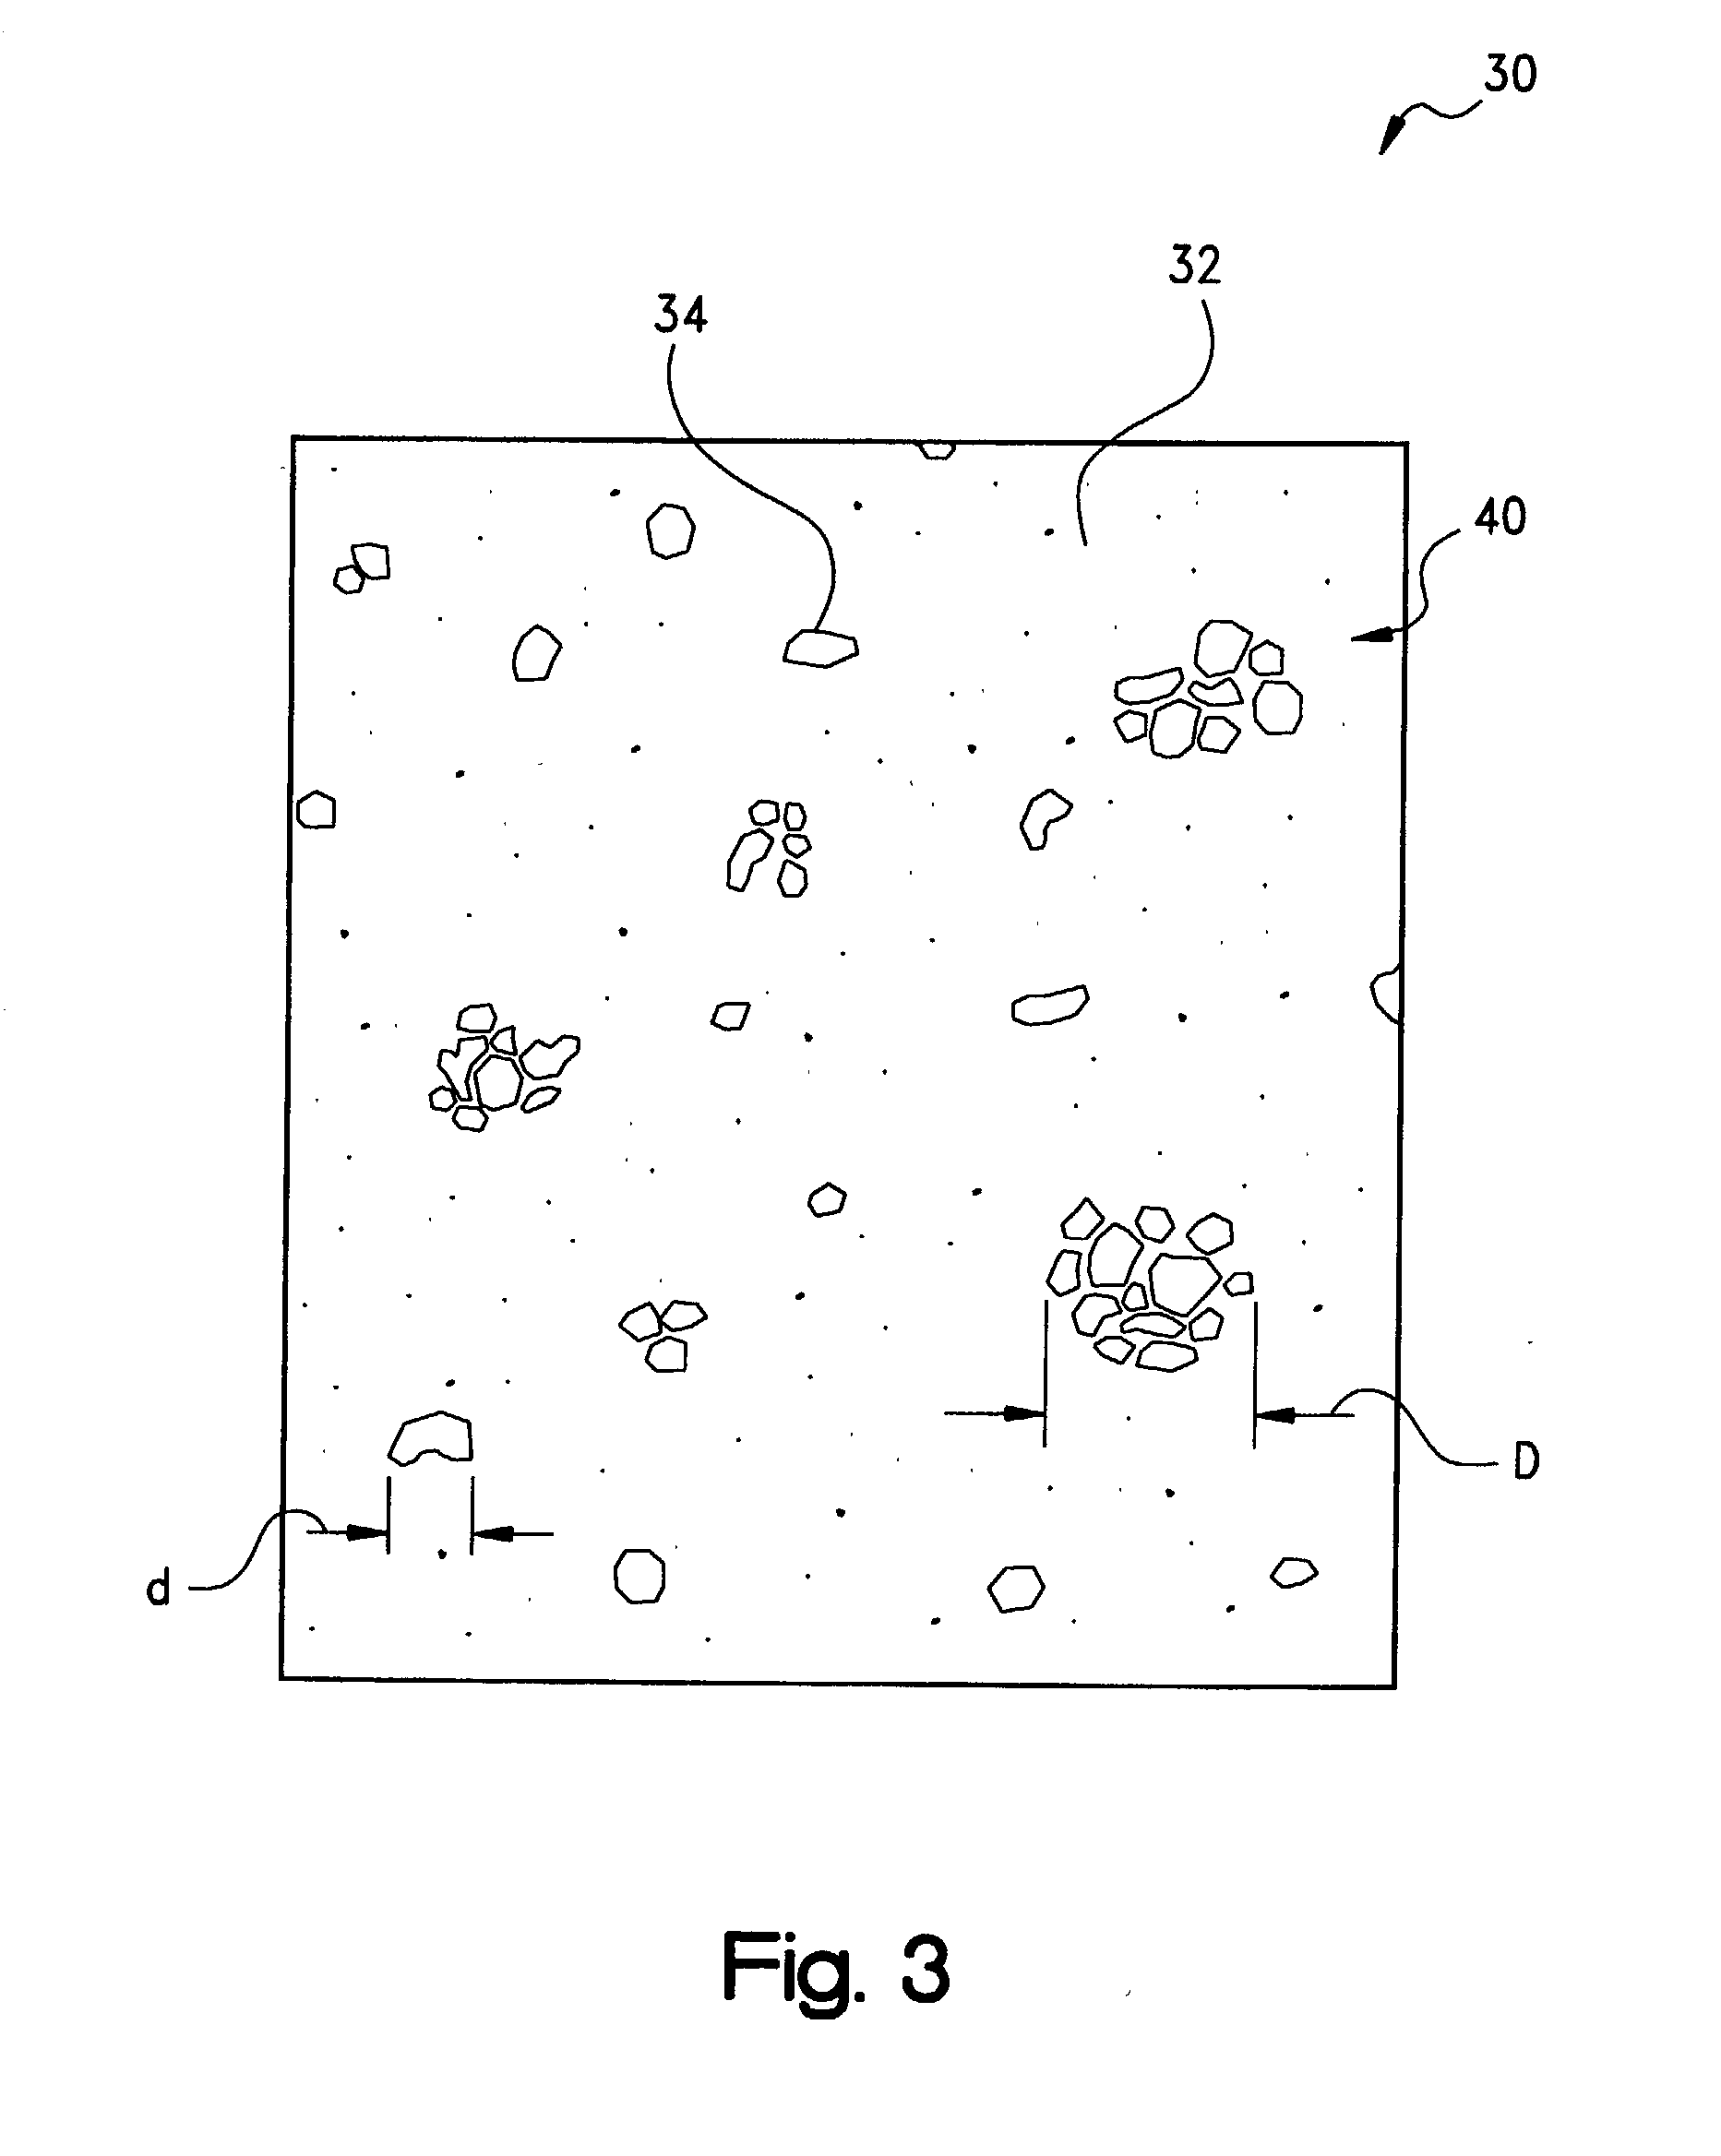 Thermal management materials having a phase change dispersion